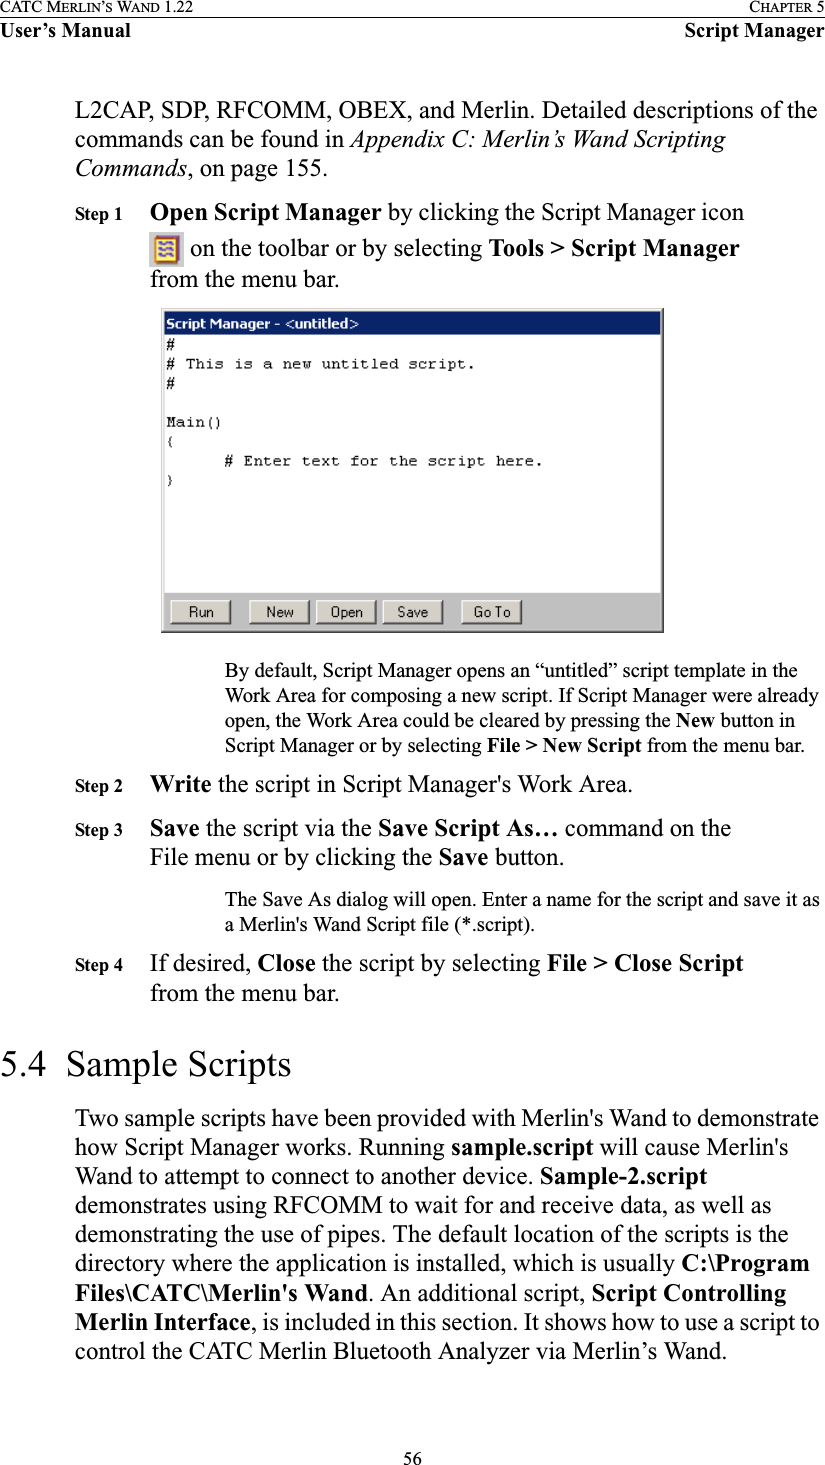 56CATC MERLIN’S WAND 1.22 CHAPTER 5User’s Manual Script ManagerL2CAP, SDP, RFCOMM, OBEX, and Merlin. Detailed descriptions of the commands can be found in Appendix C: Merlin’s Wand Scripting Commands, on page 155.Step 1 Open Script Manager by clicking the Script Manager icon  on the toolbar or by selecting Tools &gt; Script Manager from the menu bar.By default, Script Manager opens an “untitled” script template in the Work Area for composing a new script. If Script Manager were already open, the Work Area could be cleared by pressing the New button in Script Manager or by selecting File &gt; New Script from the menu bar.Step 2 Write the script in Script Manager&apos;s Work Area.Step 3 Save the script via the Save Script As… command on the File menu or by clicking the Save button.The Save As dialog will open. Enter a name for the script and save it as a Merlin&apos;s Wand Script file (*.script).Step 4 If desired, Close the script by selecting File &gt; Close Script from the menu bar.5.4  Sample ScriptsTwo sample scripts have been provided with Merlin&apos;s Wand to demonstrate how Script Manager works. Running sample.script will cause Merlin&apos;s Wand to attempt to connect to another device. Sample-2.script demonstrates using RFCOMM to wait for and receive data, as well as demonstrating the use of pipes. The default location of the scripts is the directory where the application is installed, which is usually C:\Program Files\CATC\Merlin&apos;s Wand. An additional script, Script Controlling Merlin Interface, is included in this section. It shows how to use a script to control the CATC Merlin Bluetooth Analyzer via Merlin’s Wand.